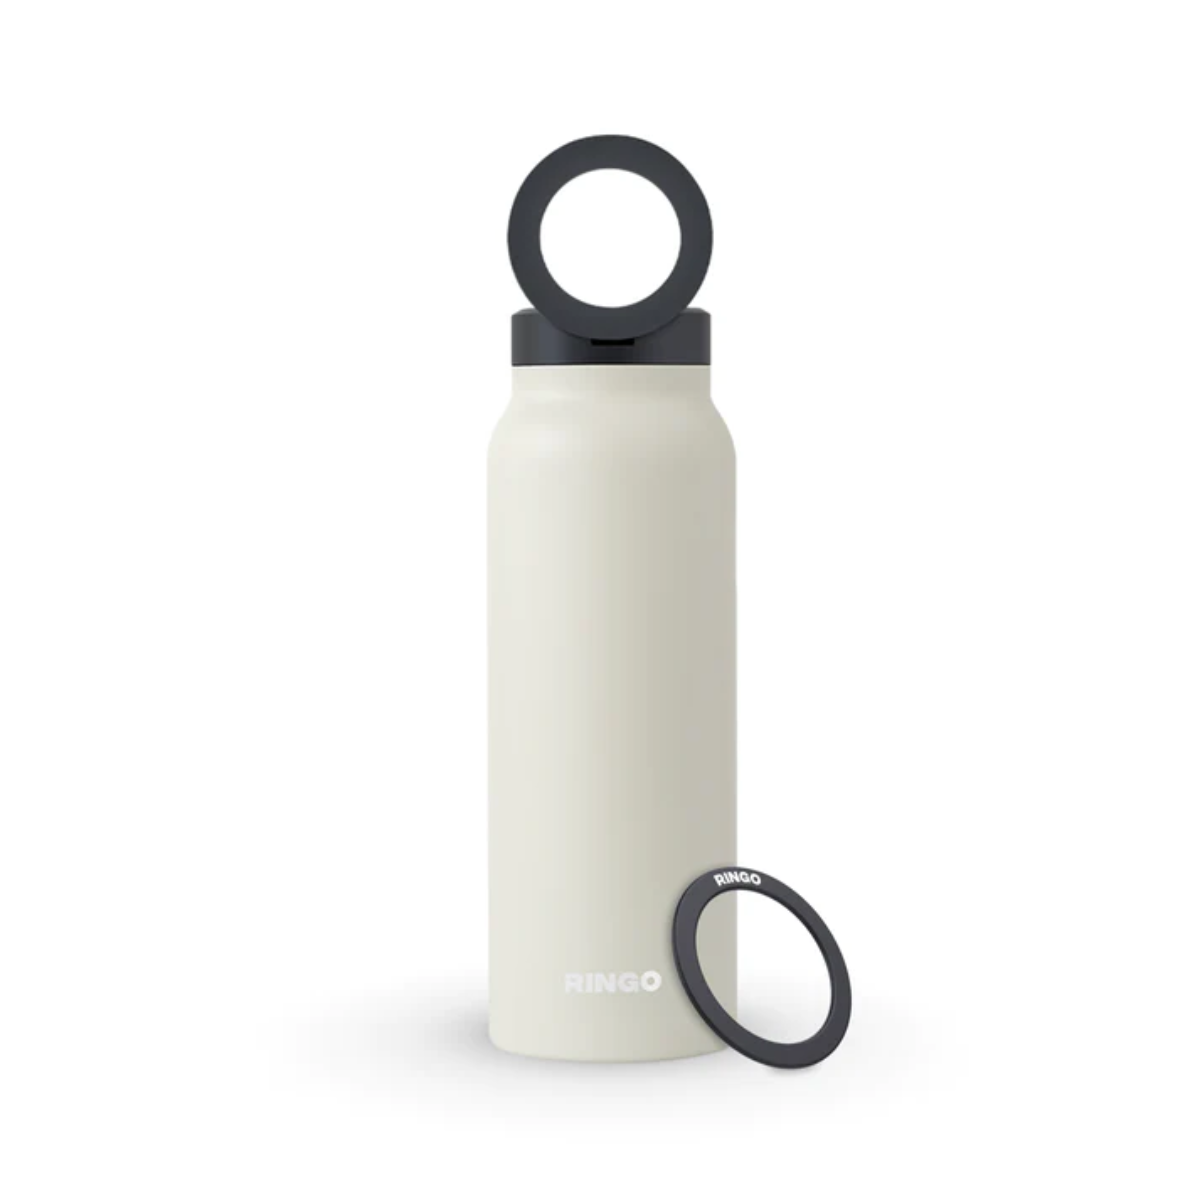 Ringo Water Bottle + Free Magnetic Booster Ring (Ivory)